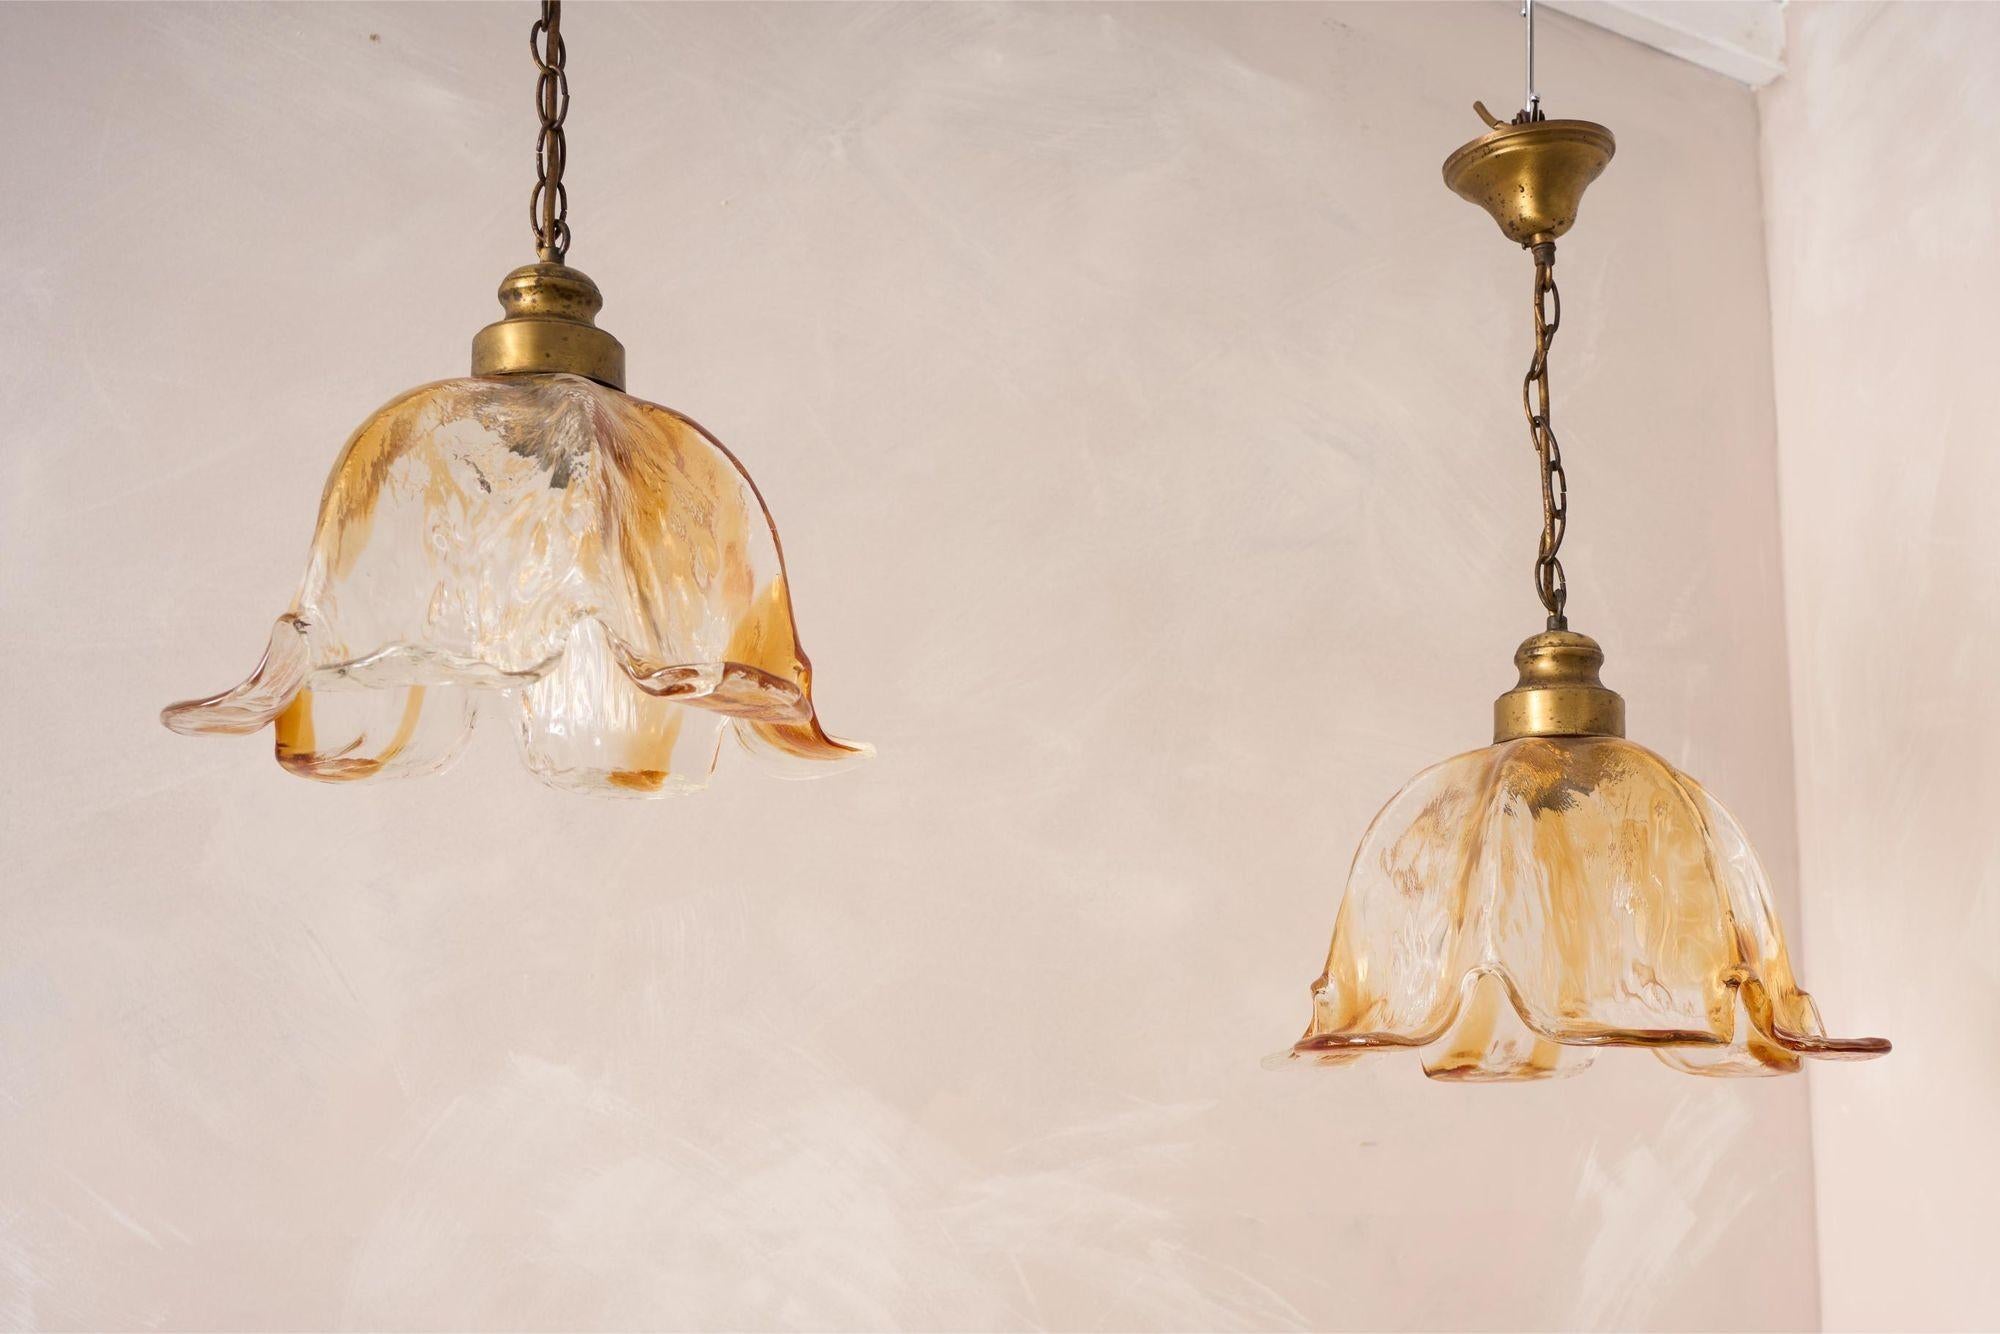 Spanish Amber glass tulip pendant lights - 10 available For Sale 2